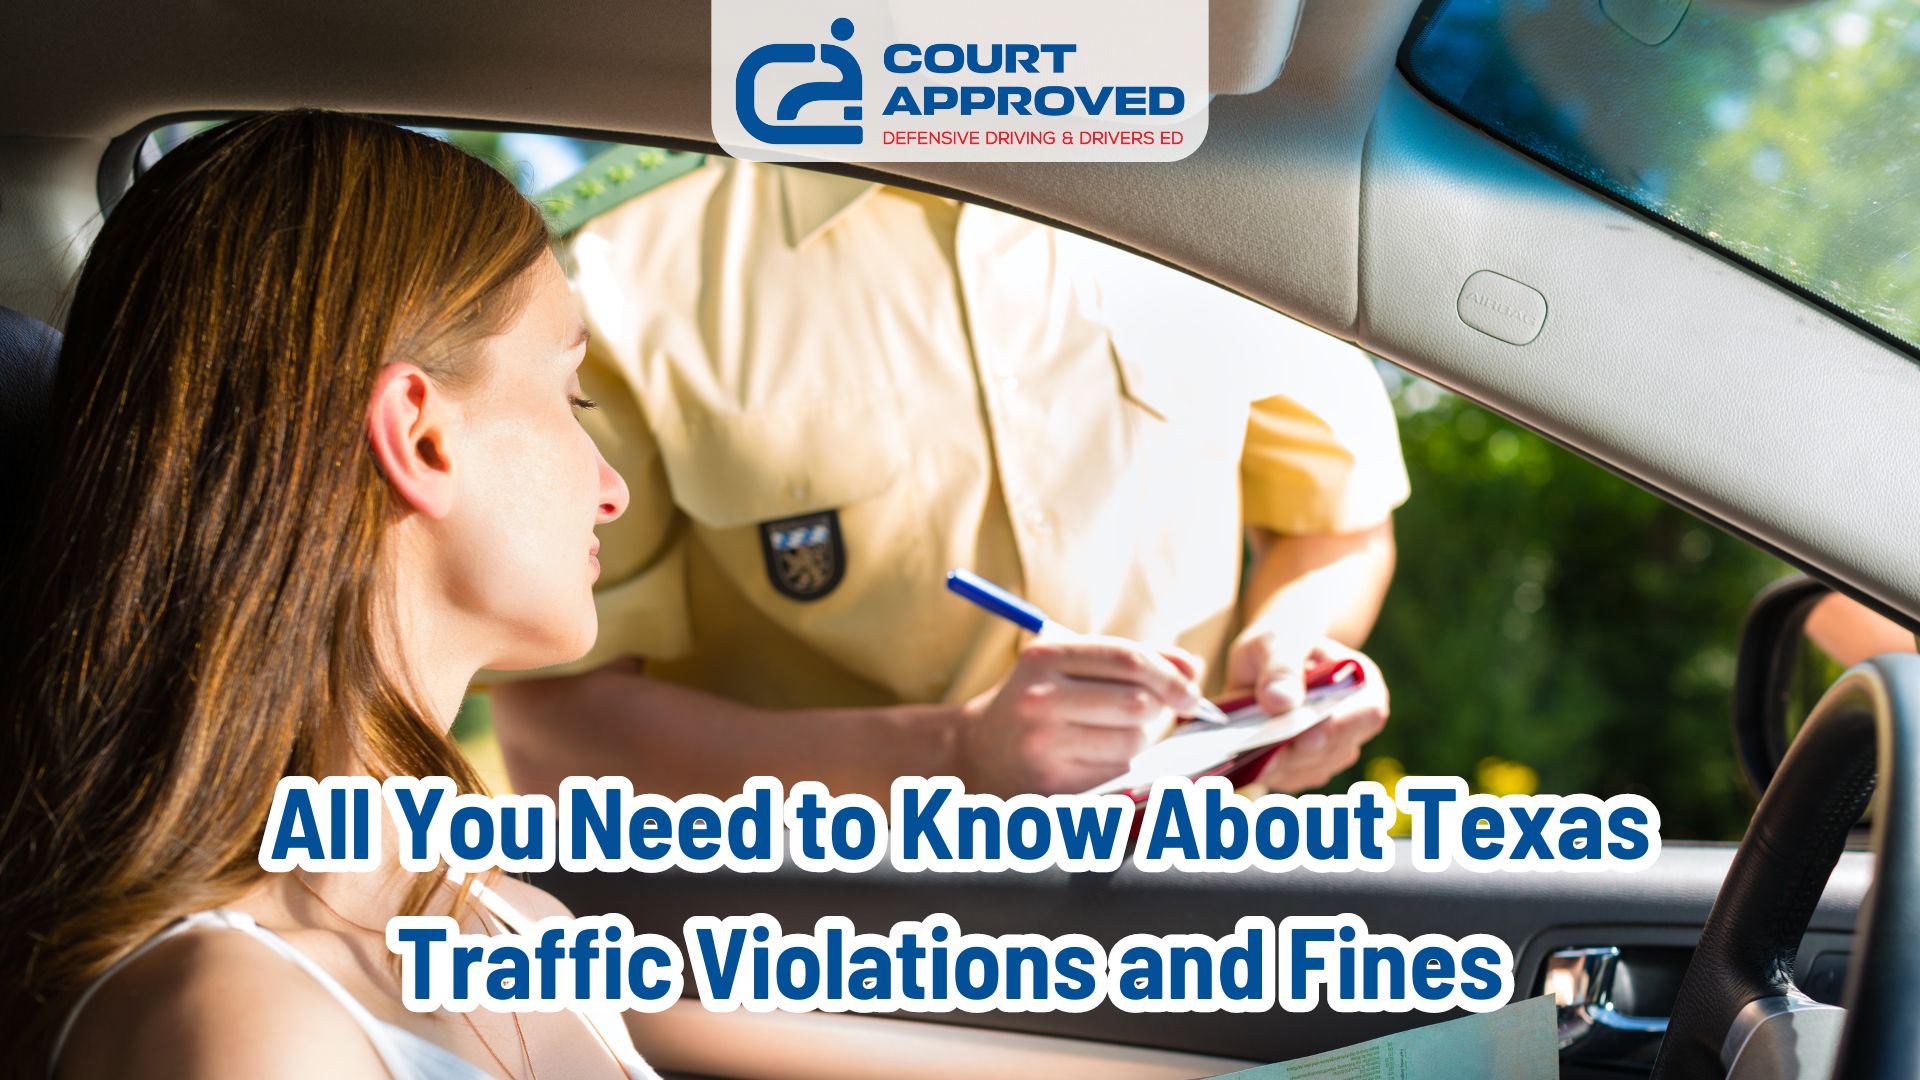 All You Need to Know About Texas Traffic Violations and Fines